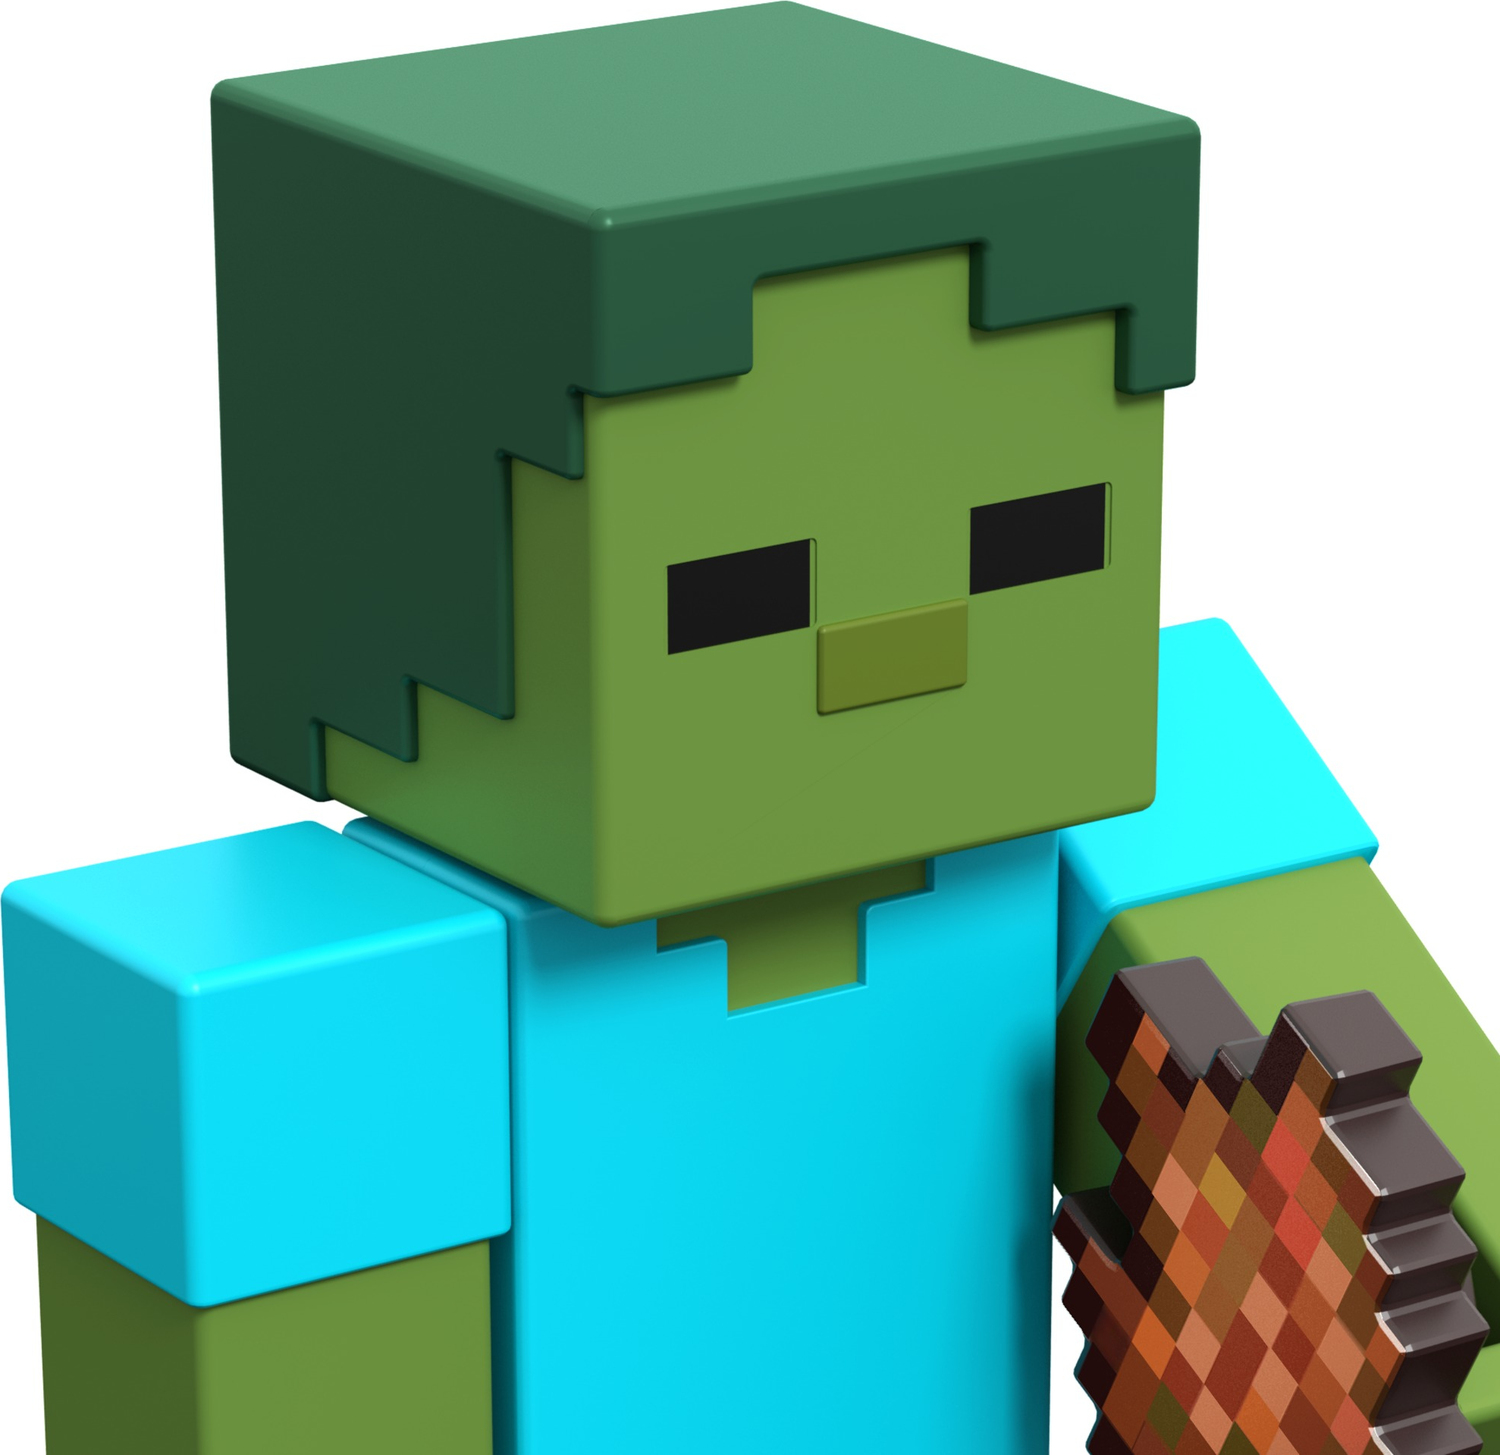 Minecraft Craft-A-Block Figures - Each Sold Individually